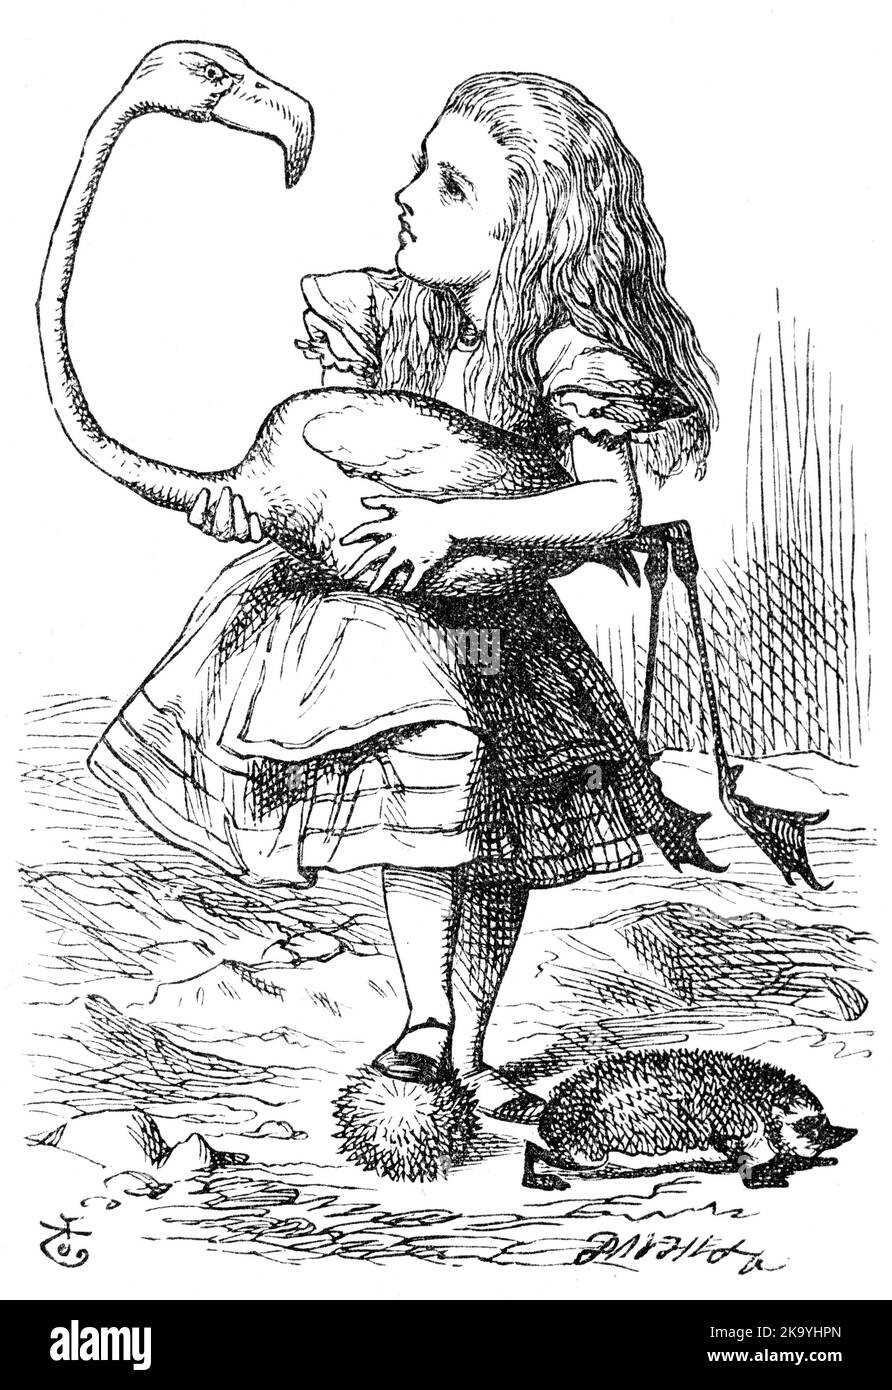 https://c8.alamy.com/comp/2K9YHPN/illustration-from-alice-in-wonderland-the-chief-difficulty-alice-found-at-first-was-in-managing-her-flamingo-illustration-by-john-tenniel-1865-2K9YHPN.jpg